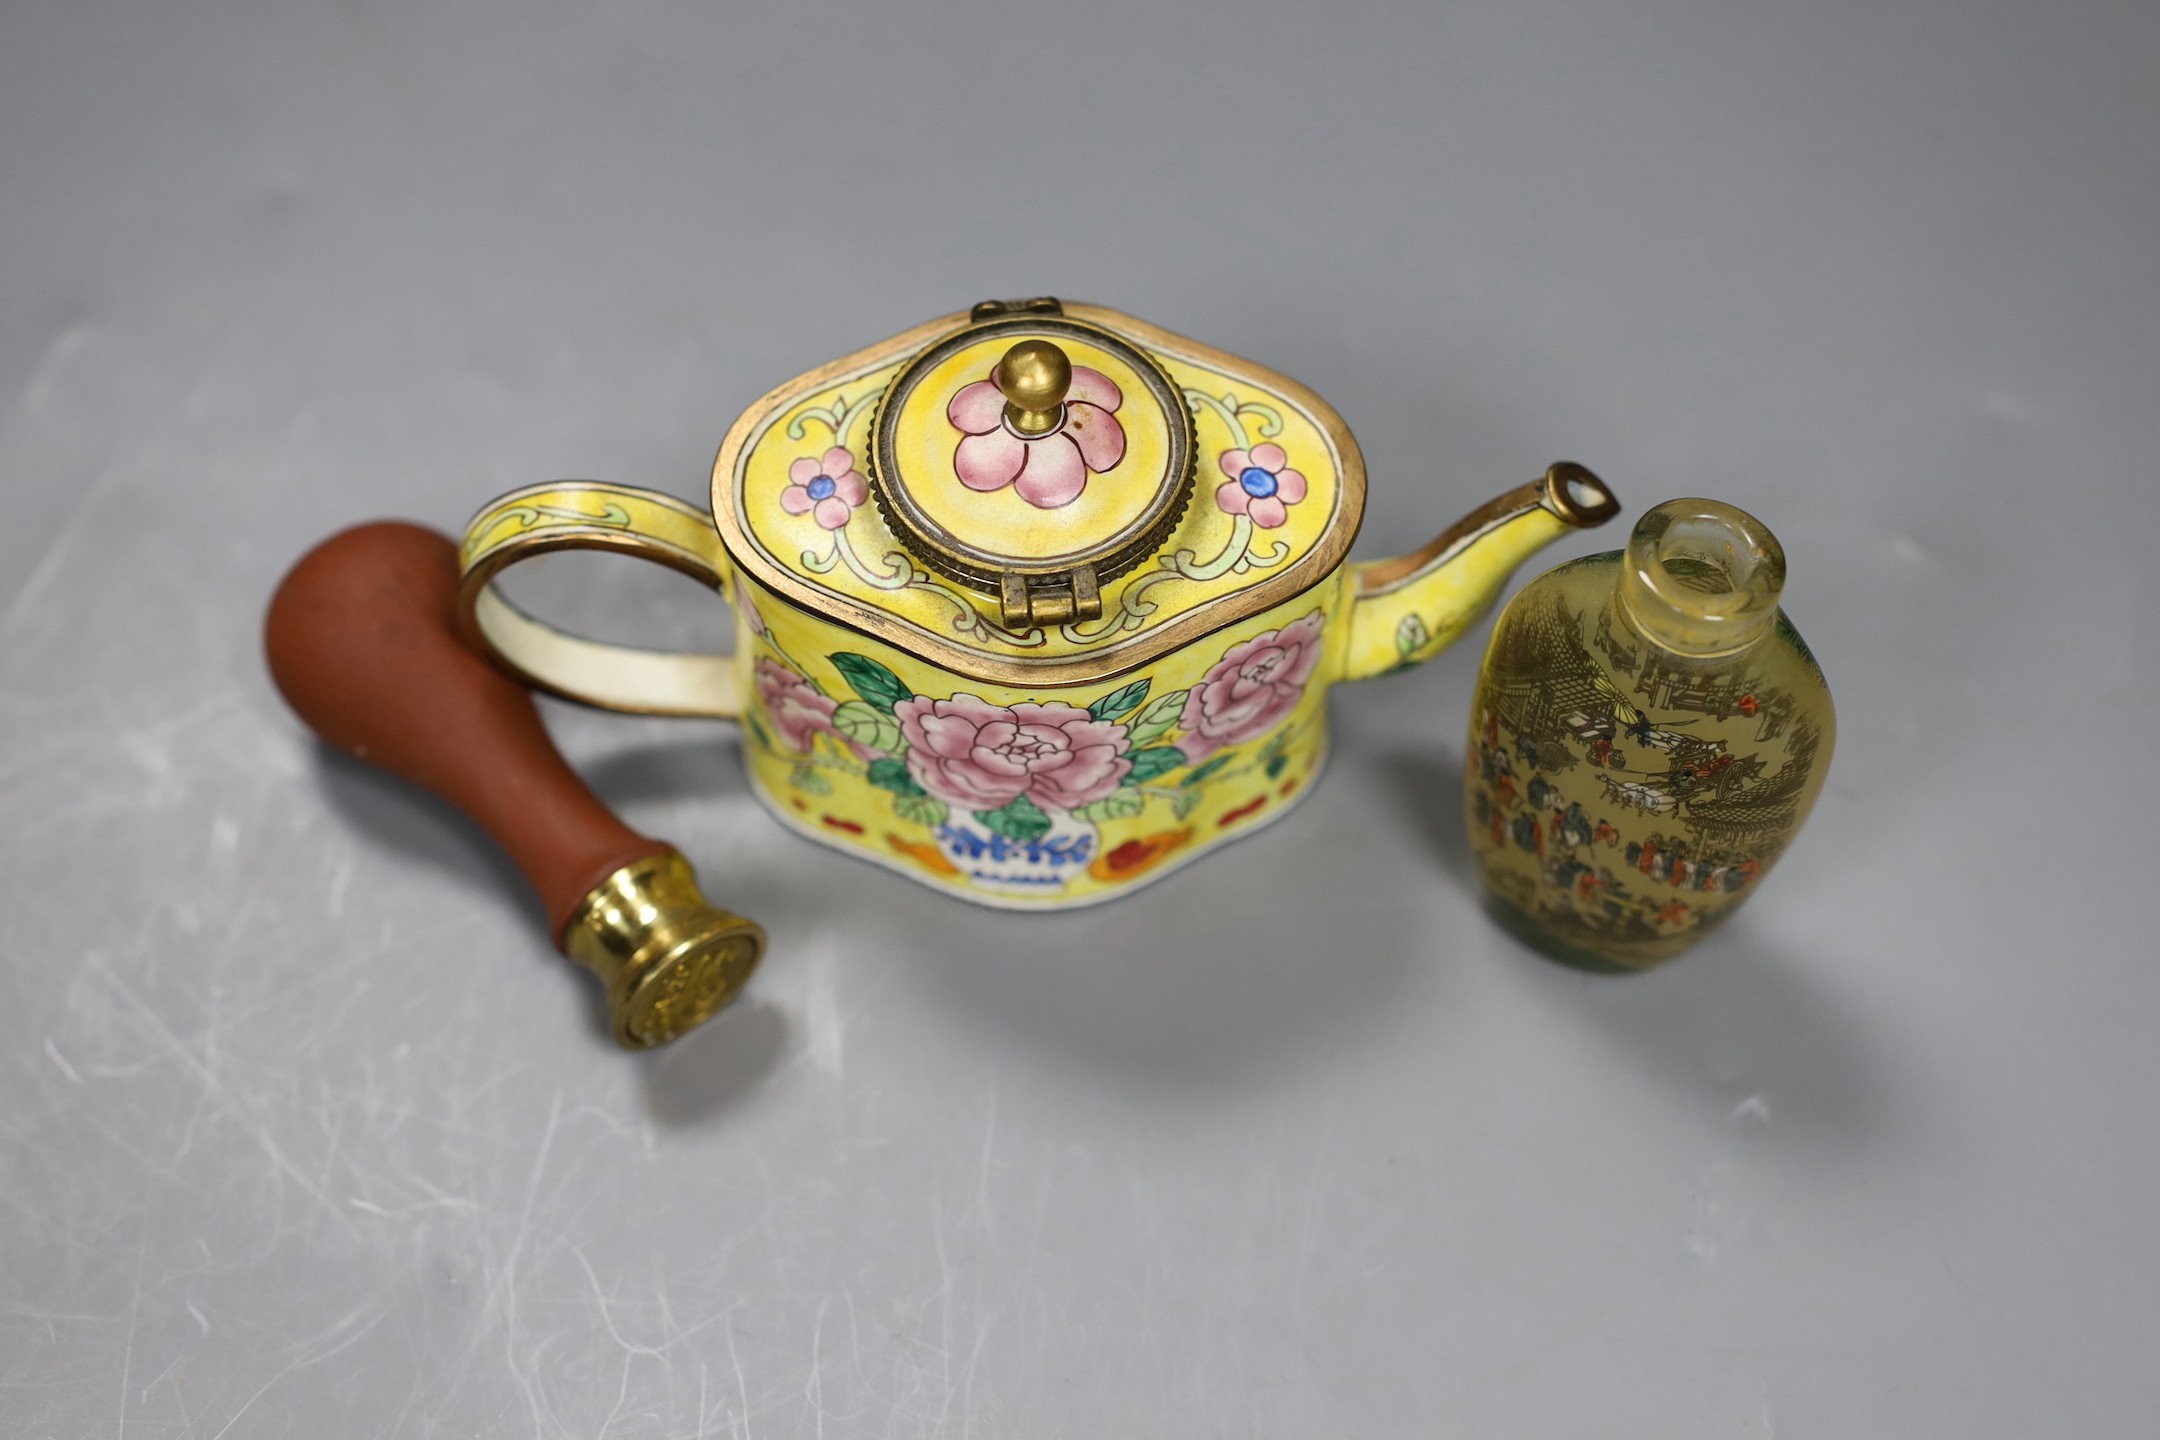 A Canton enamel miniature teapot and a snuff bottle, together with a European stamp seal - Image 3 of 3